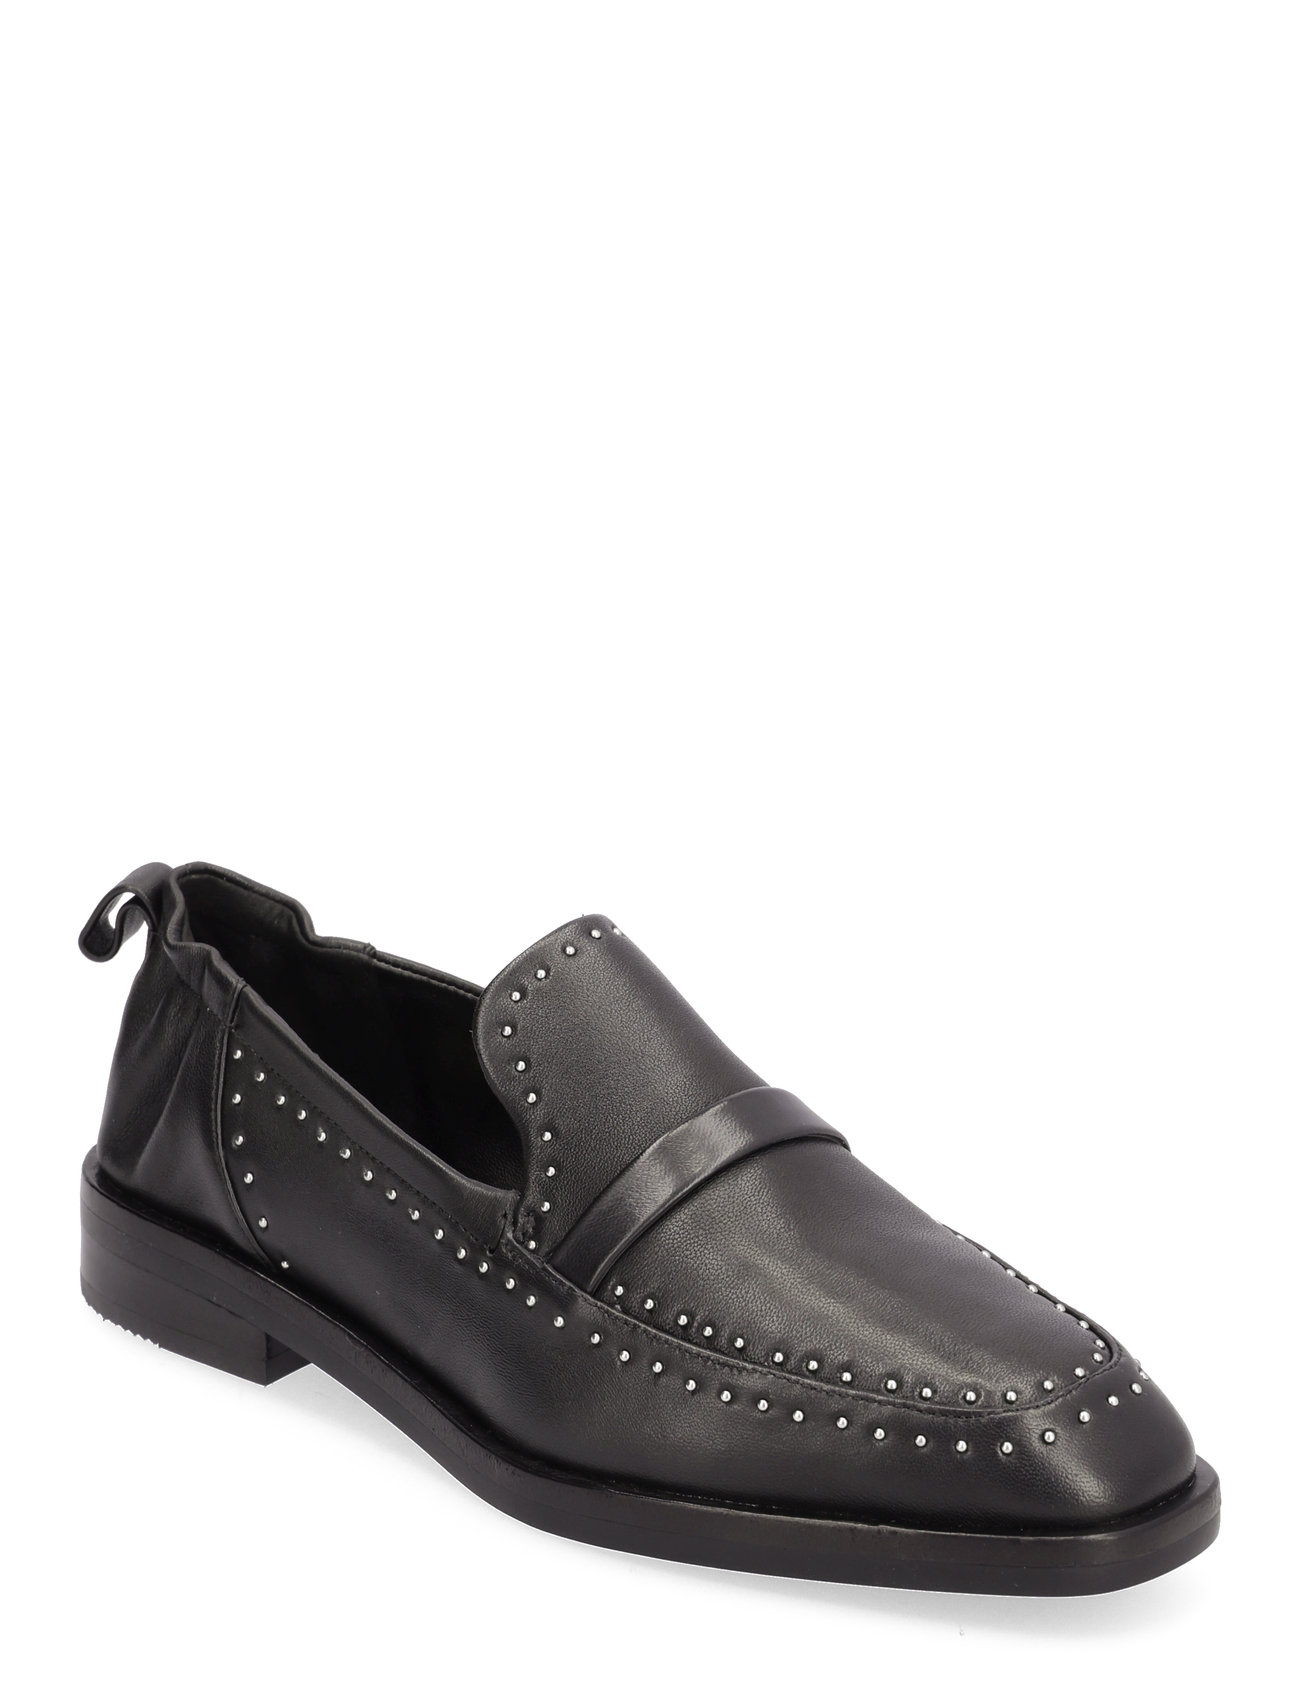 Alexa- Soft Penny Loafer W Micro Studs Designers Flats Loafers Black 3.1 Phillip Lim